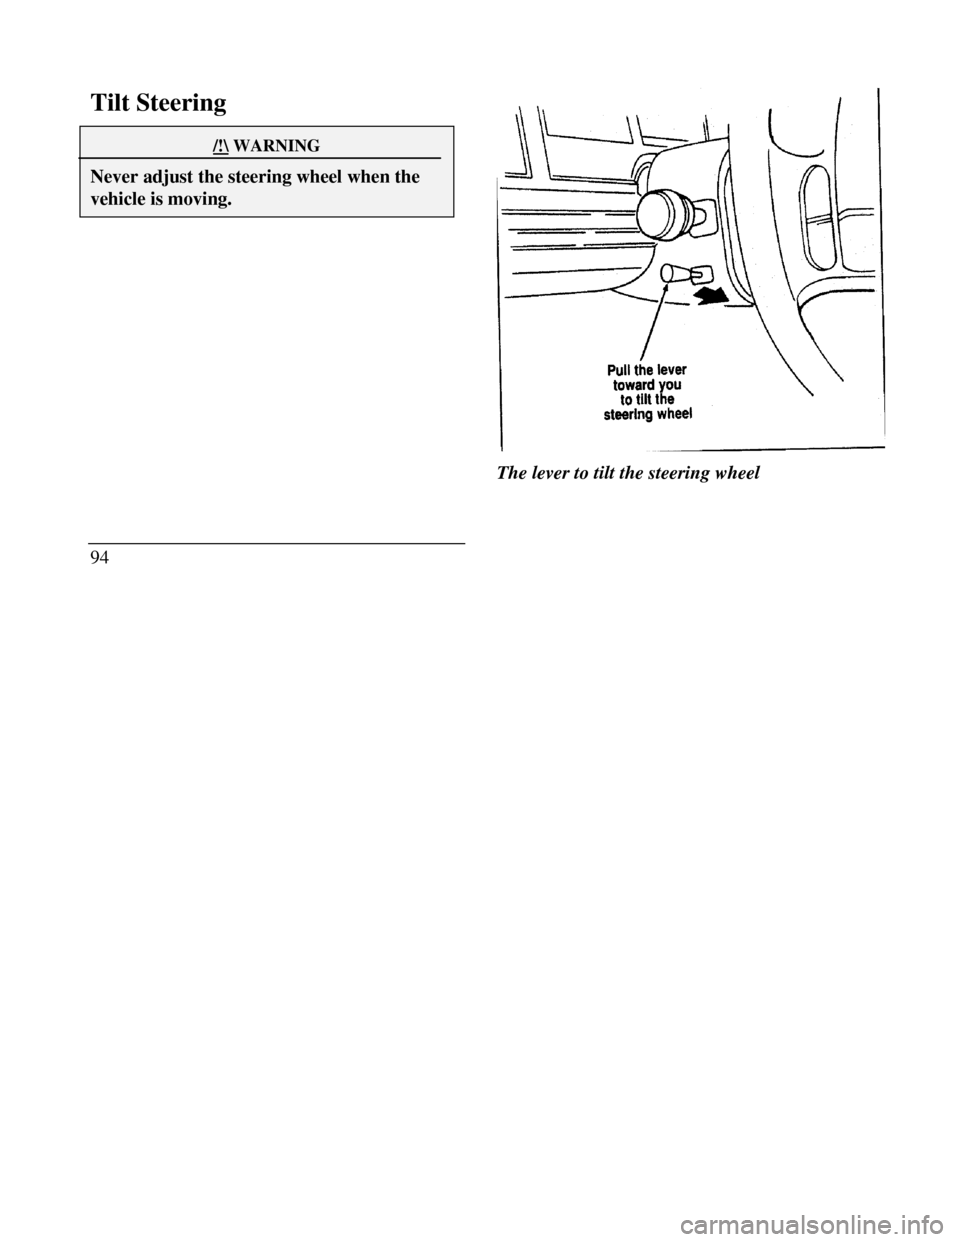 LINCOLN CONTINENTAL 1996  Customer Assistance Guide Tilt Steering/!\ WARNINGNever adjust the steering wheel when thevehicle is moving.94The lever to tilt the steering wheel 